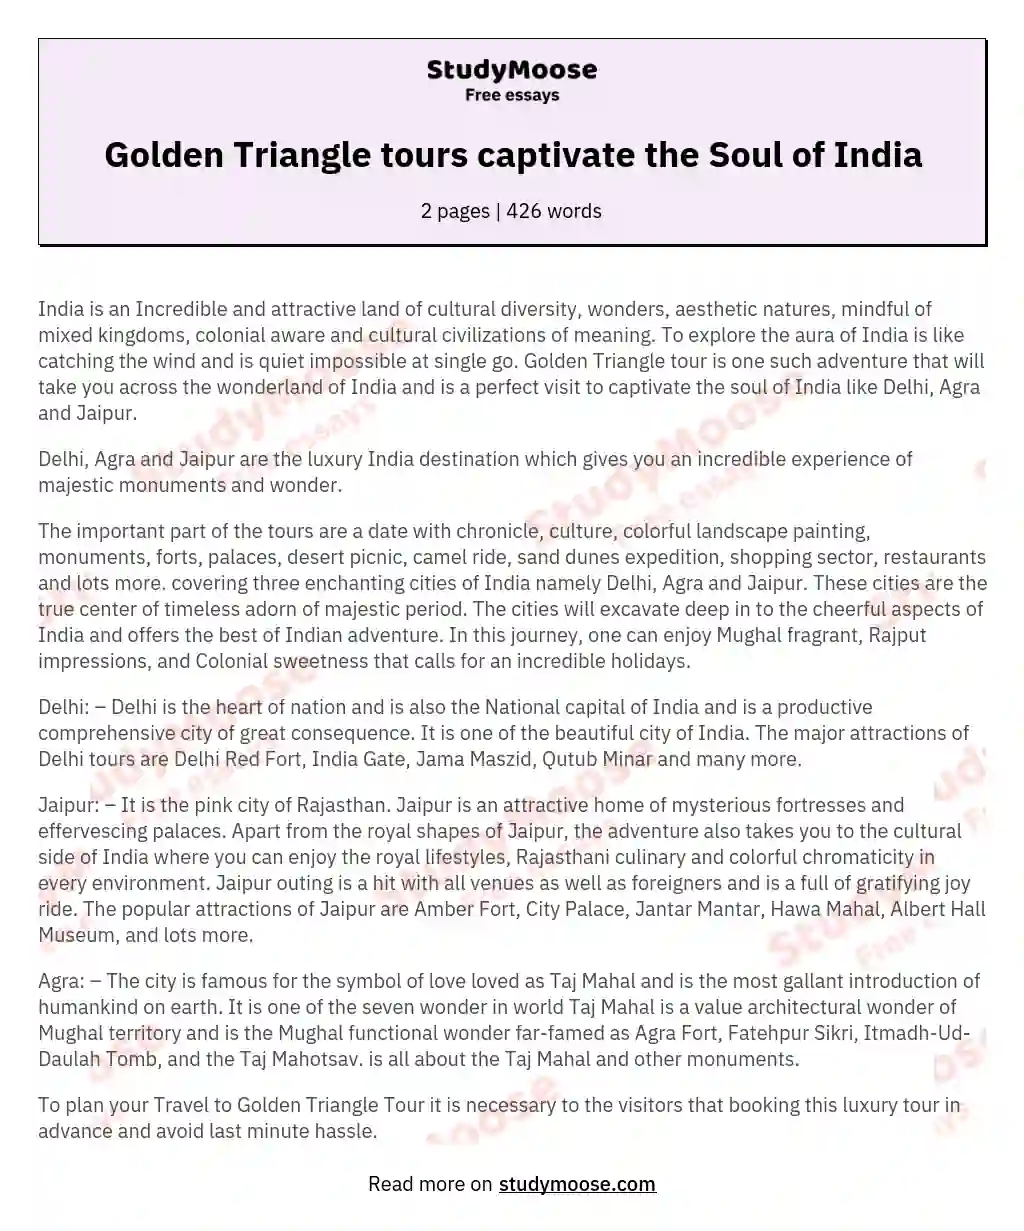 Golden Triangle tours captivate the Soul of India